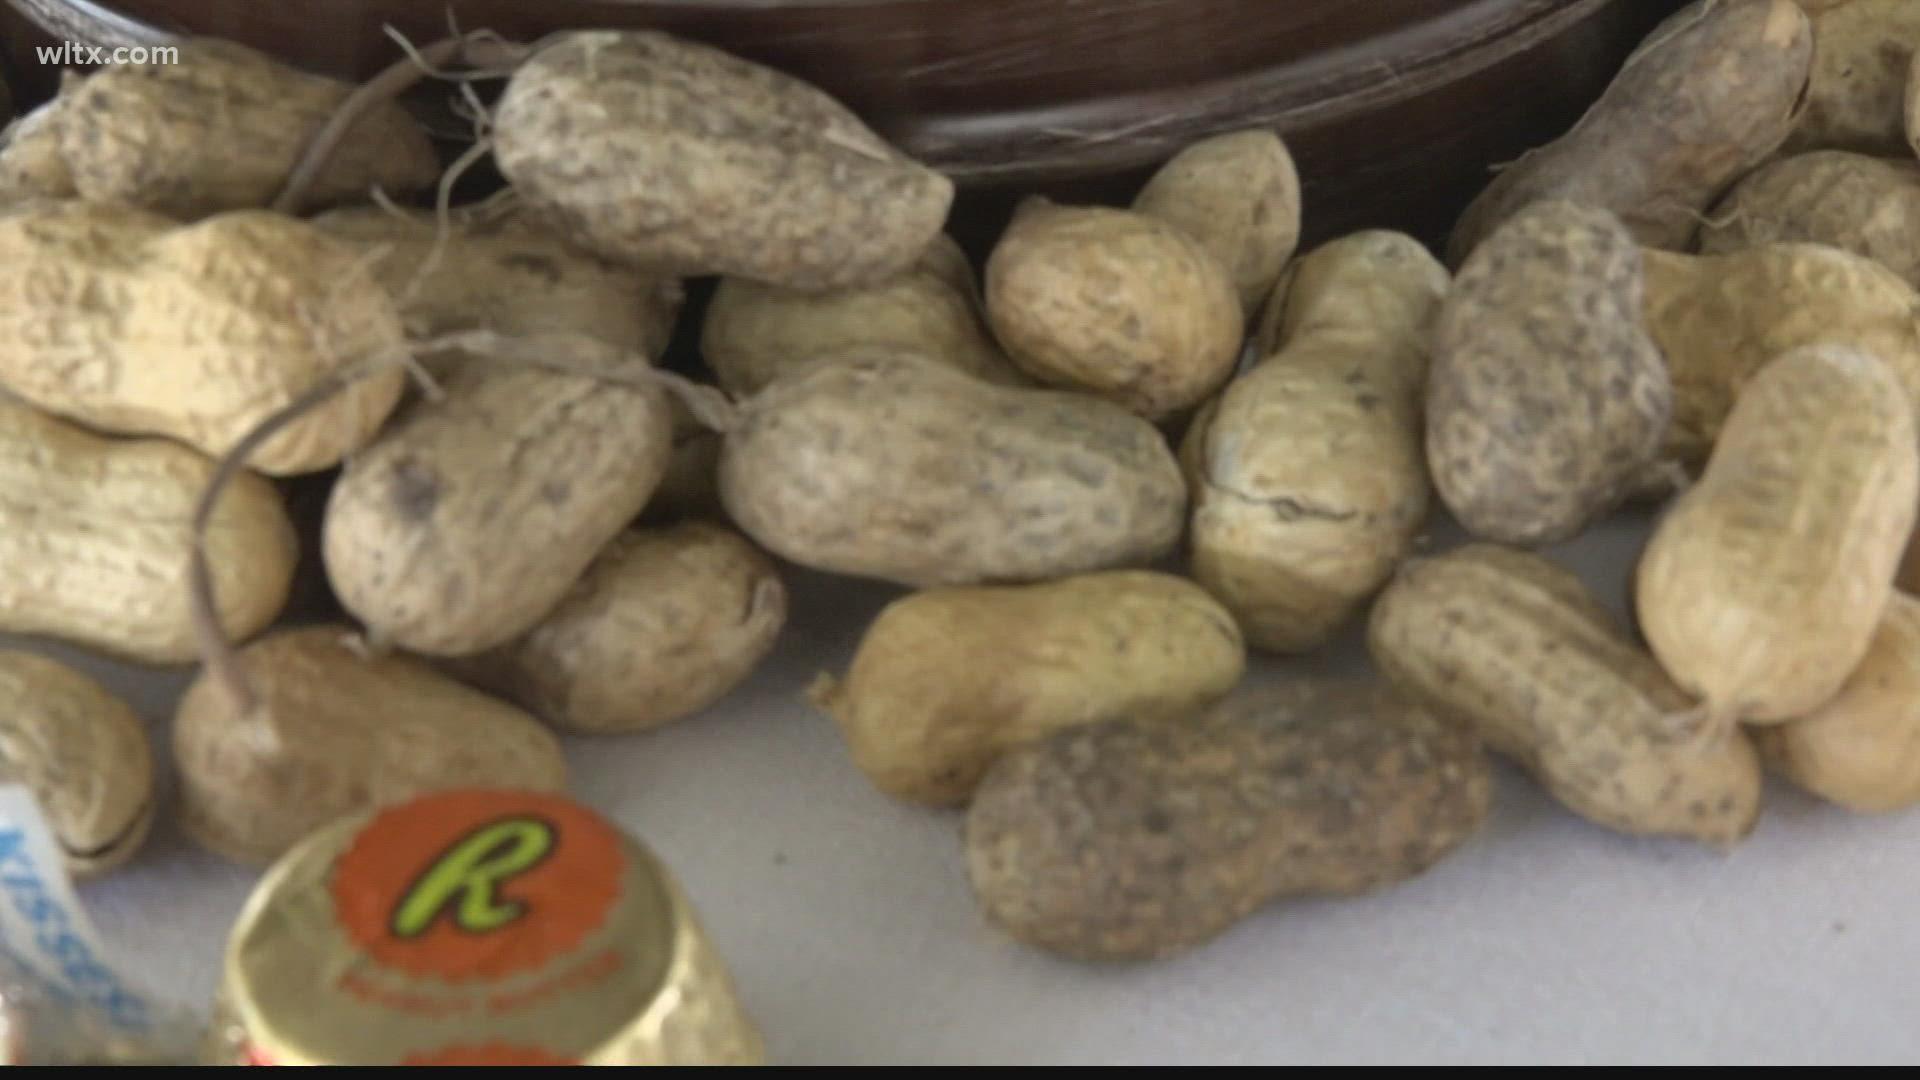 Premium Peanut, a Georgia based peanut shelling company is going to be building in Orangeburg county and say they will create over 130 jobs in next 5 years.